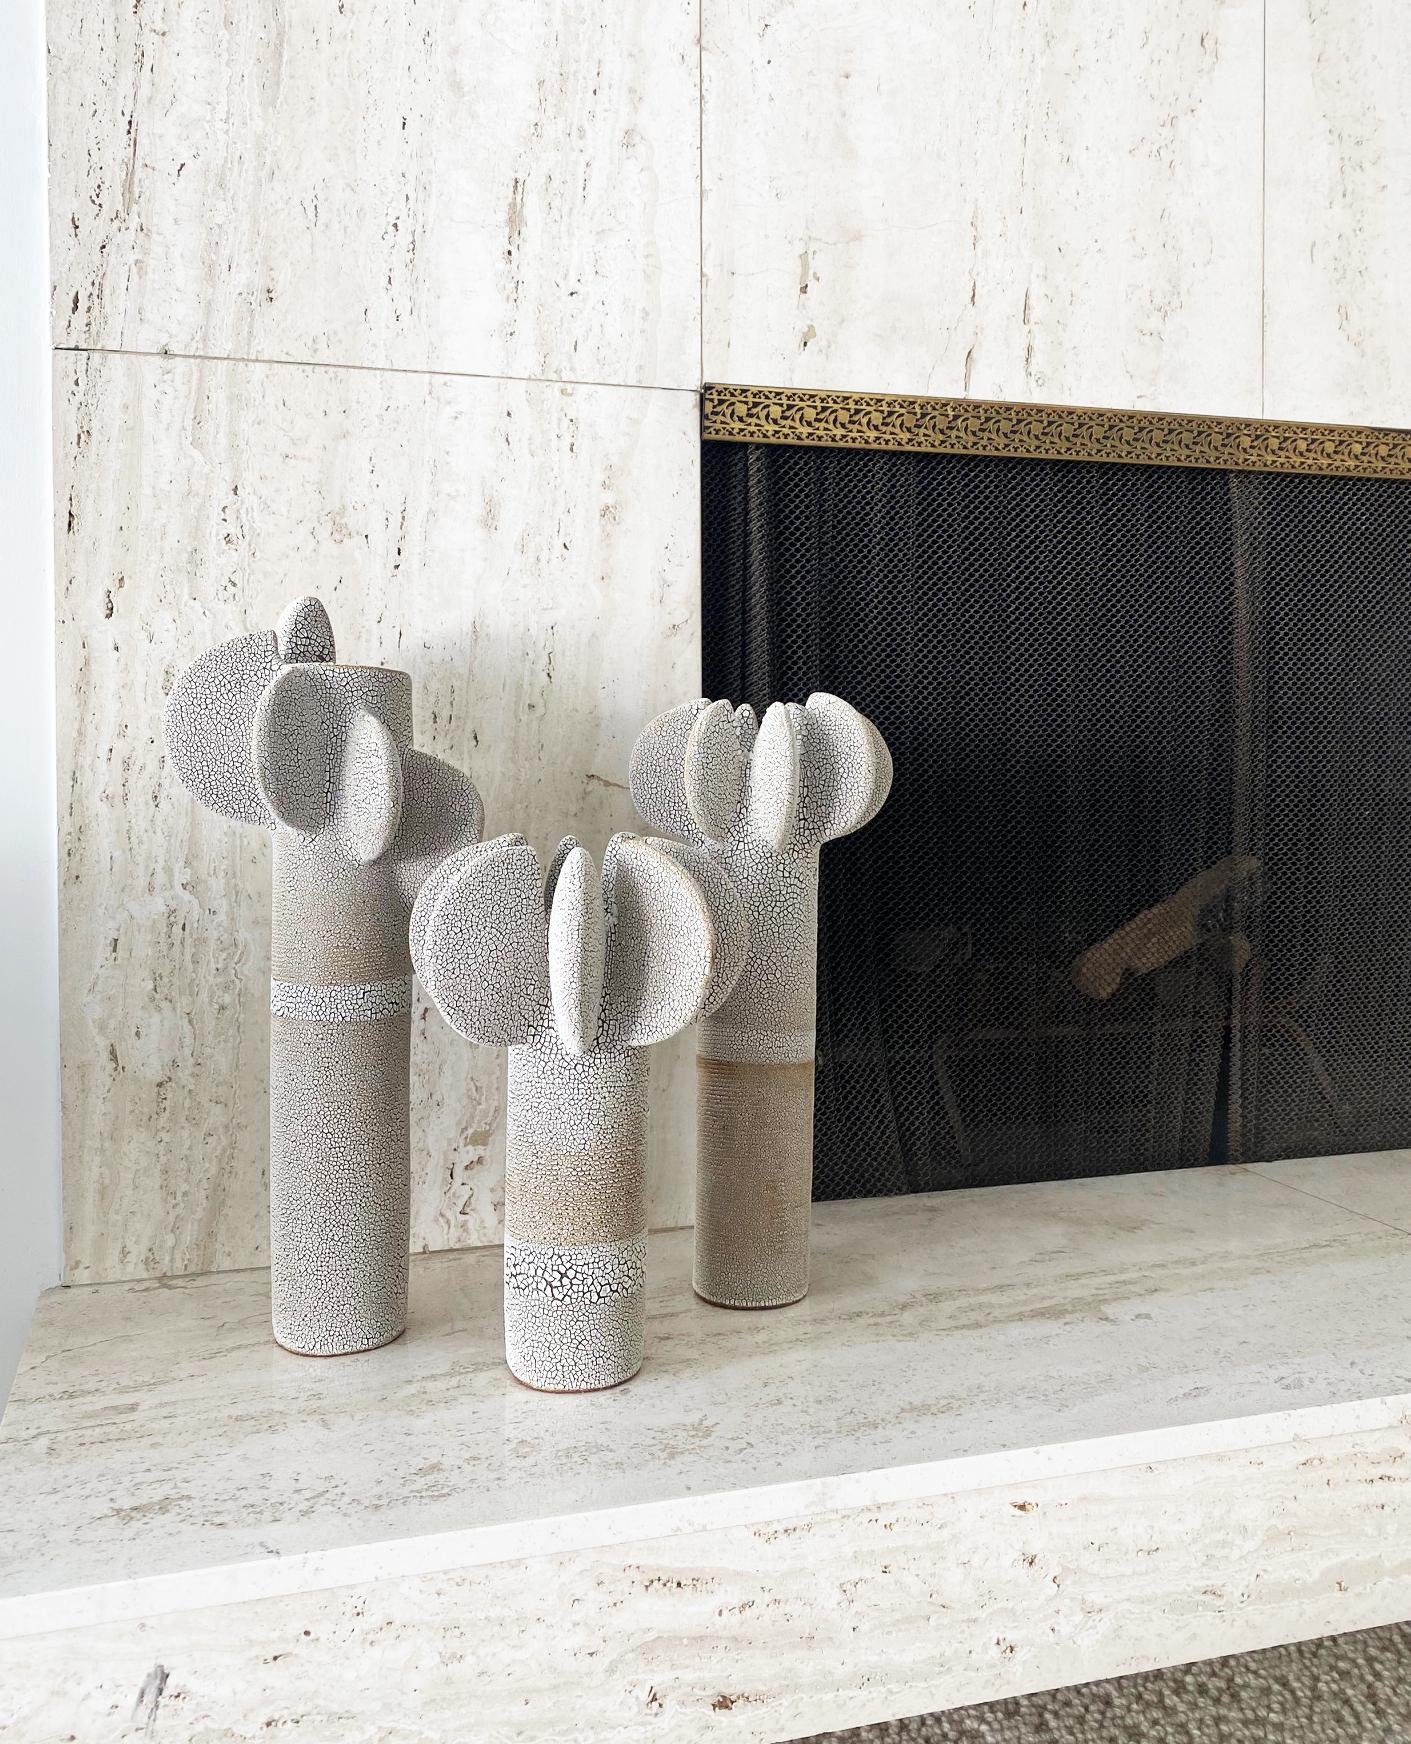 Set of 3 tempo sculptures by Olivia Cognet
Materials: Ceramic
Dimensions: 1 Tall around 55 cm tall 
 2 Medium 45 cm tall.
  

Tempo
Dynamic sculptures decorated with textured, subtly imperfect disks, in which repetition echoes the art of